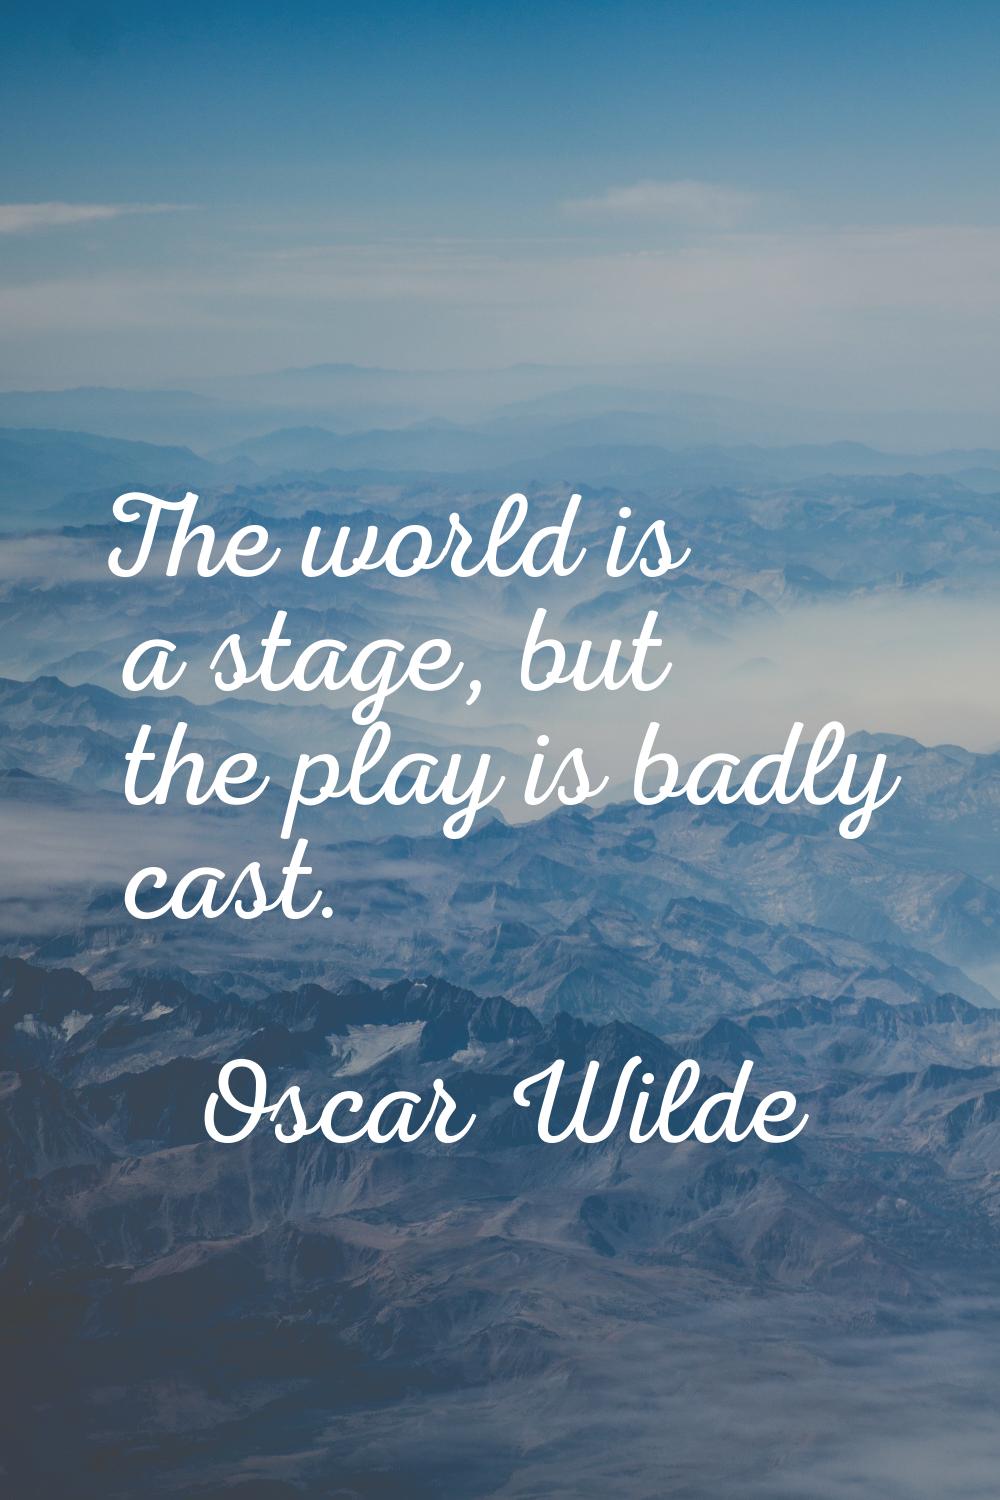 The world is a stage, but the play is badly cast.